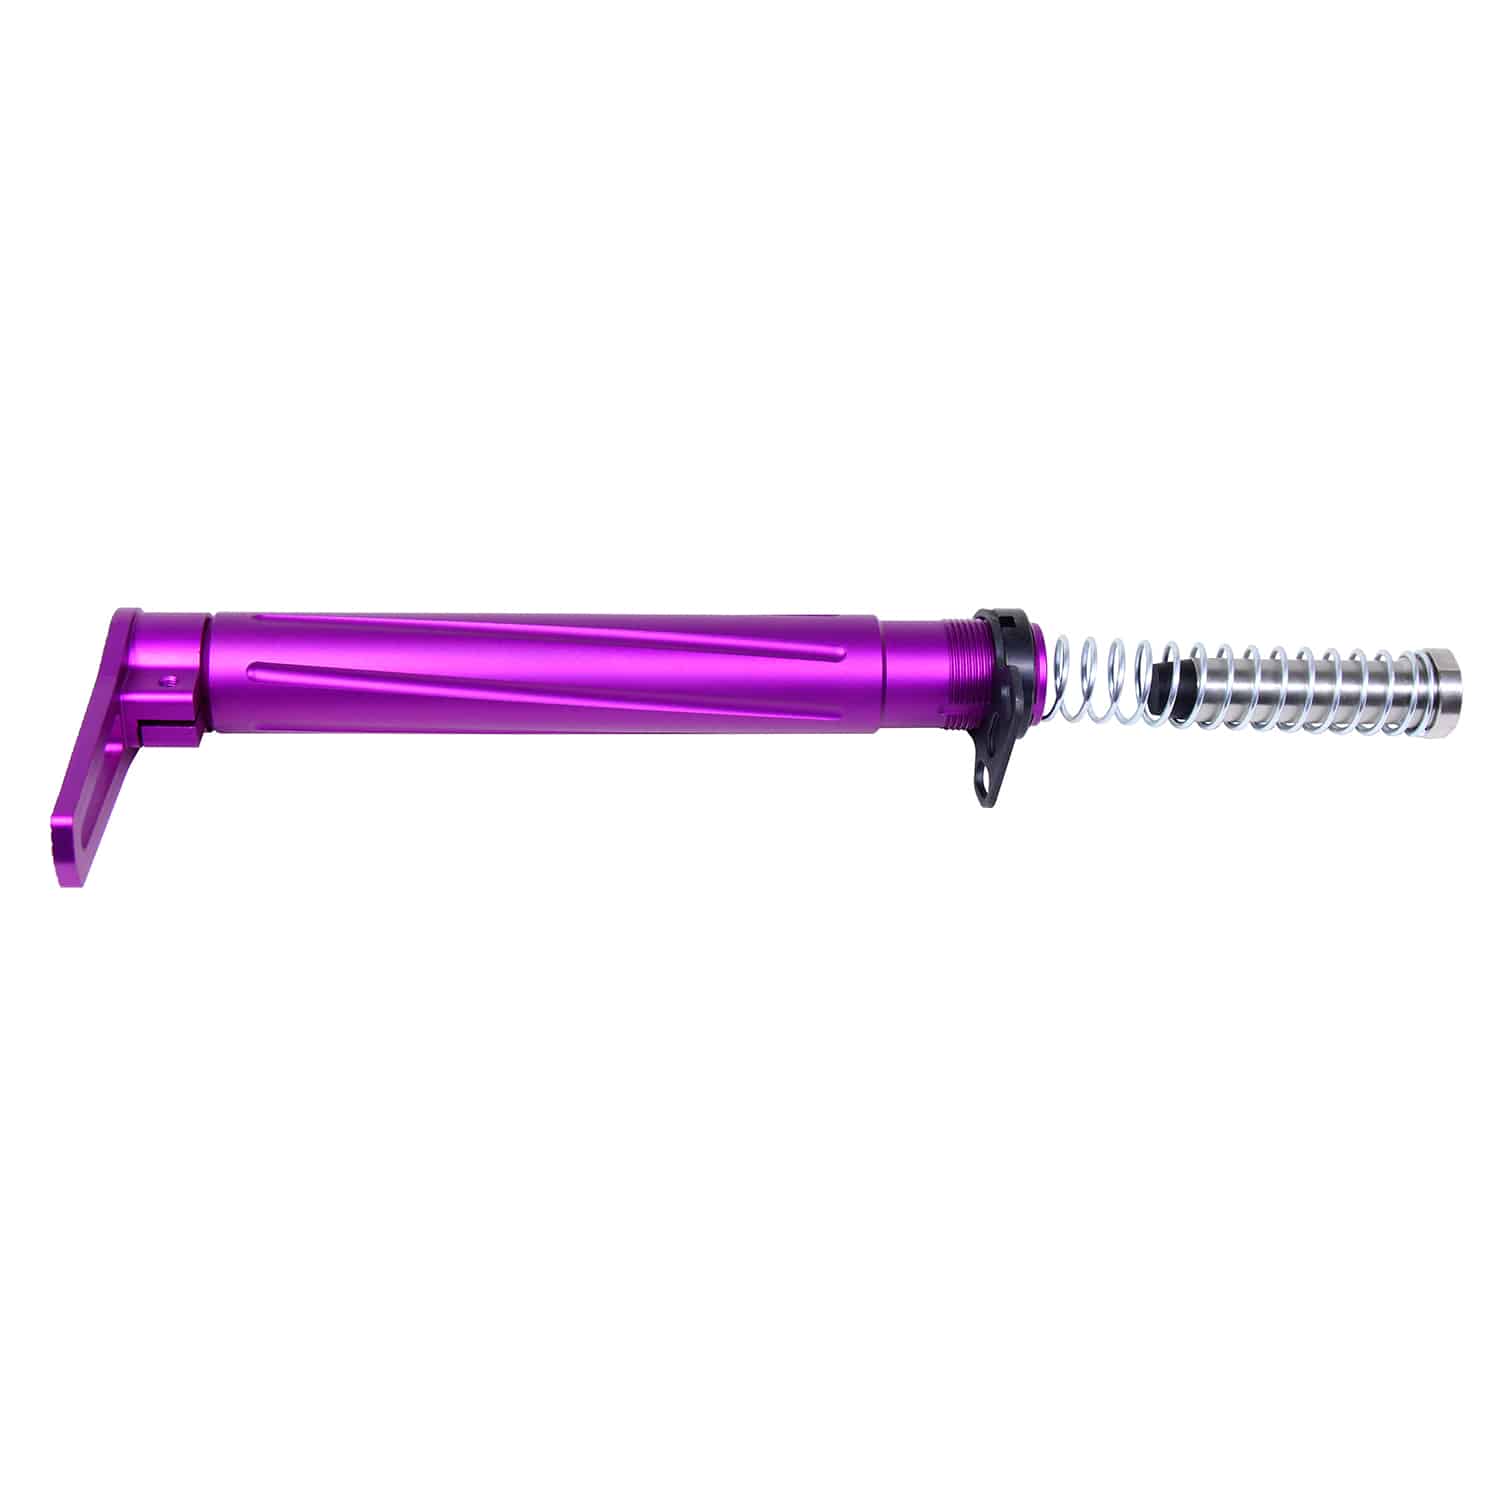 AR-15 Airlite Series Skeleton Stock in Anodized Purple